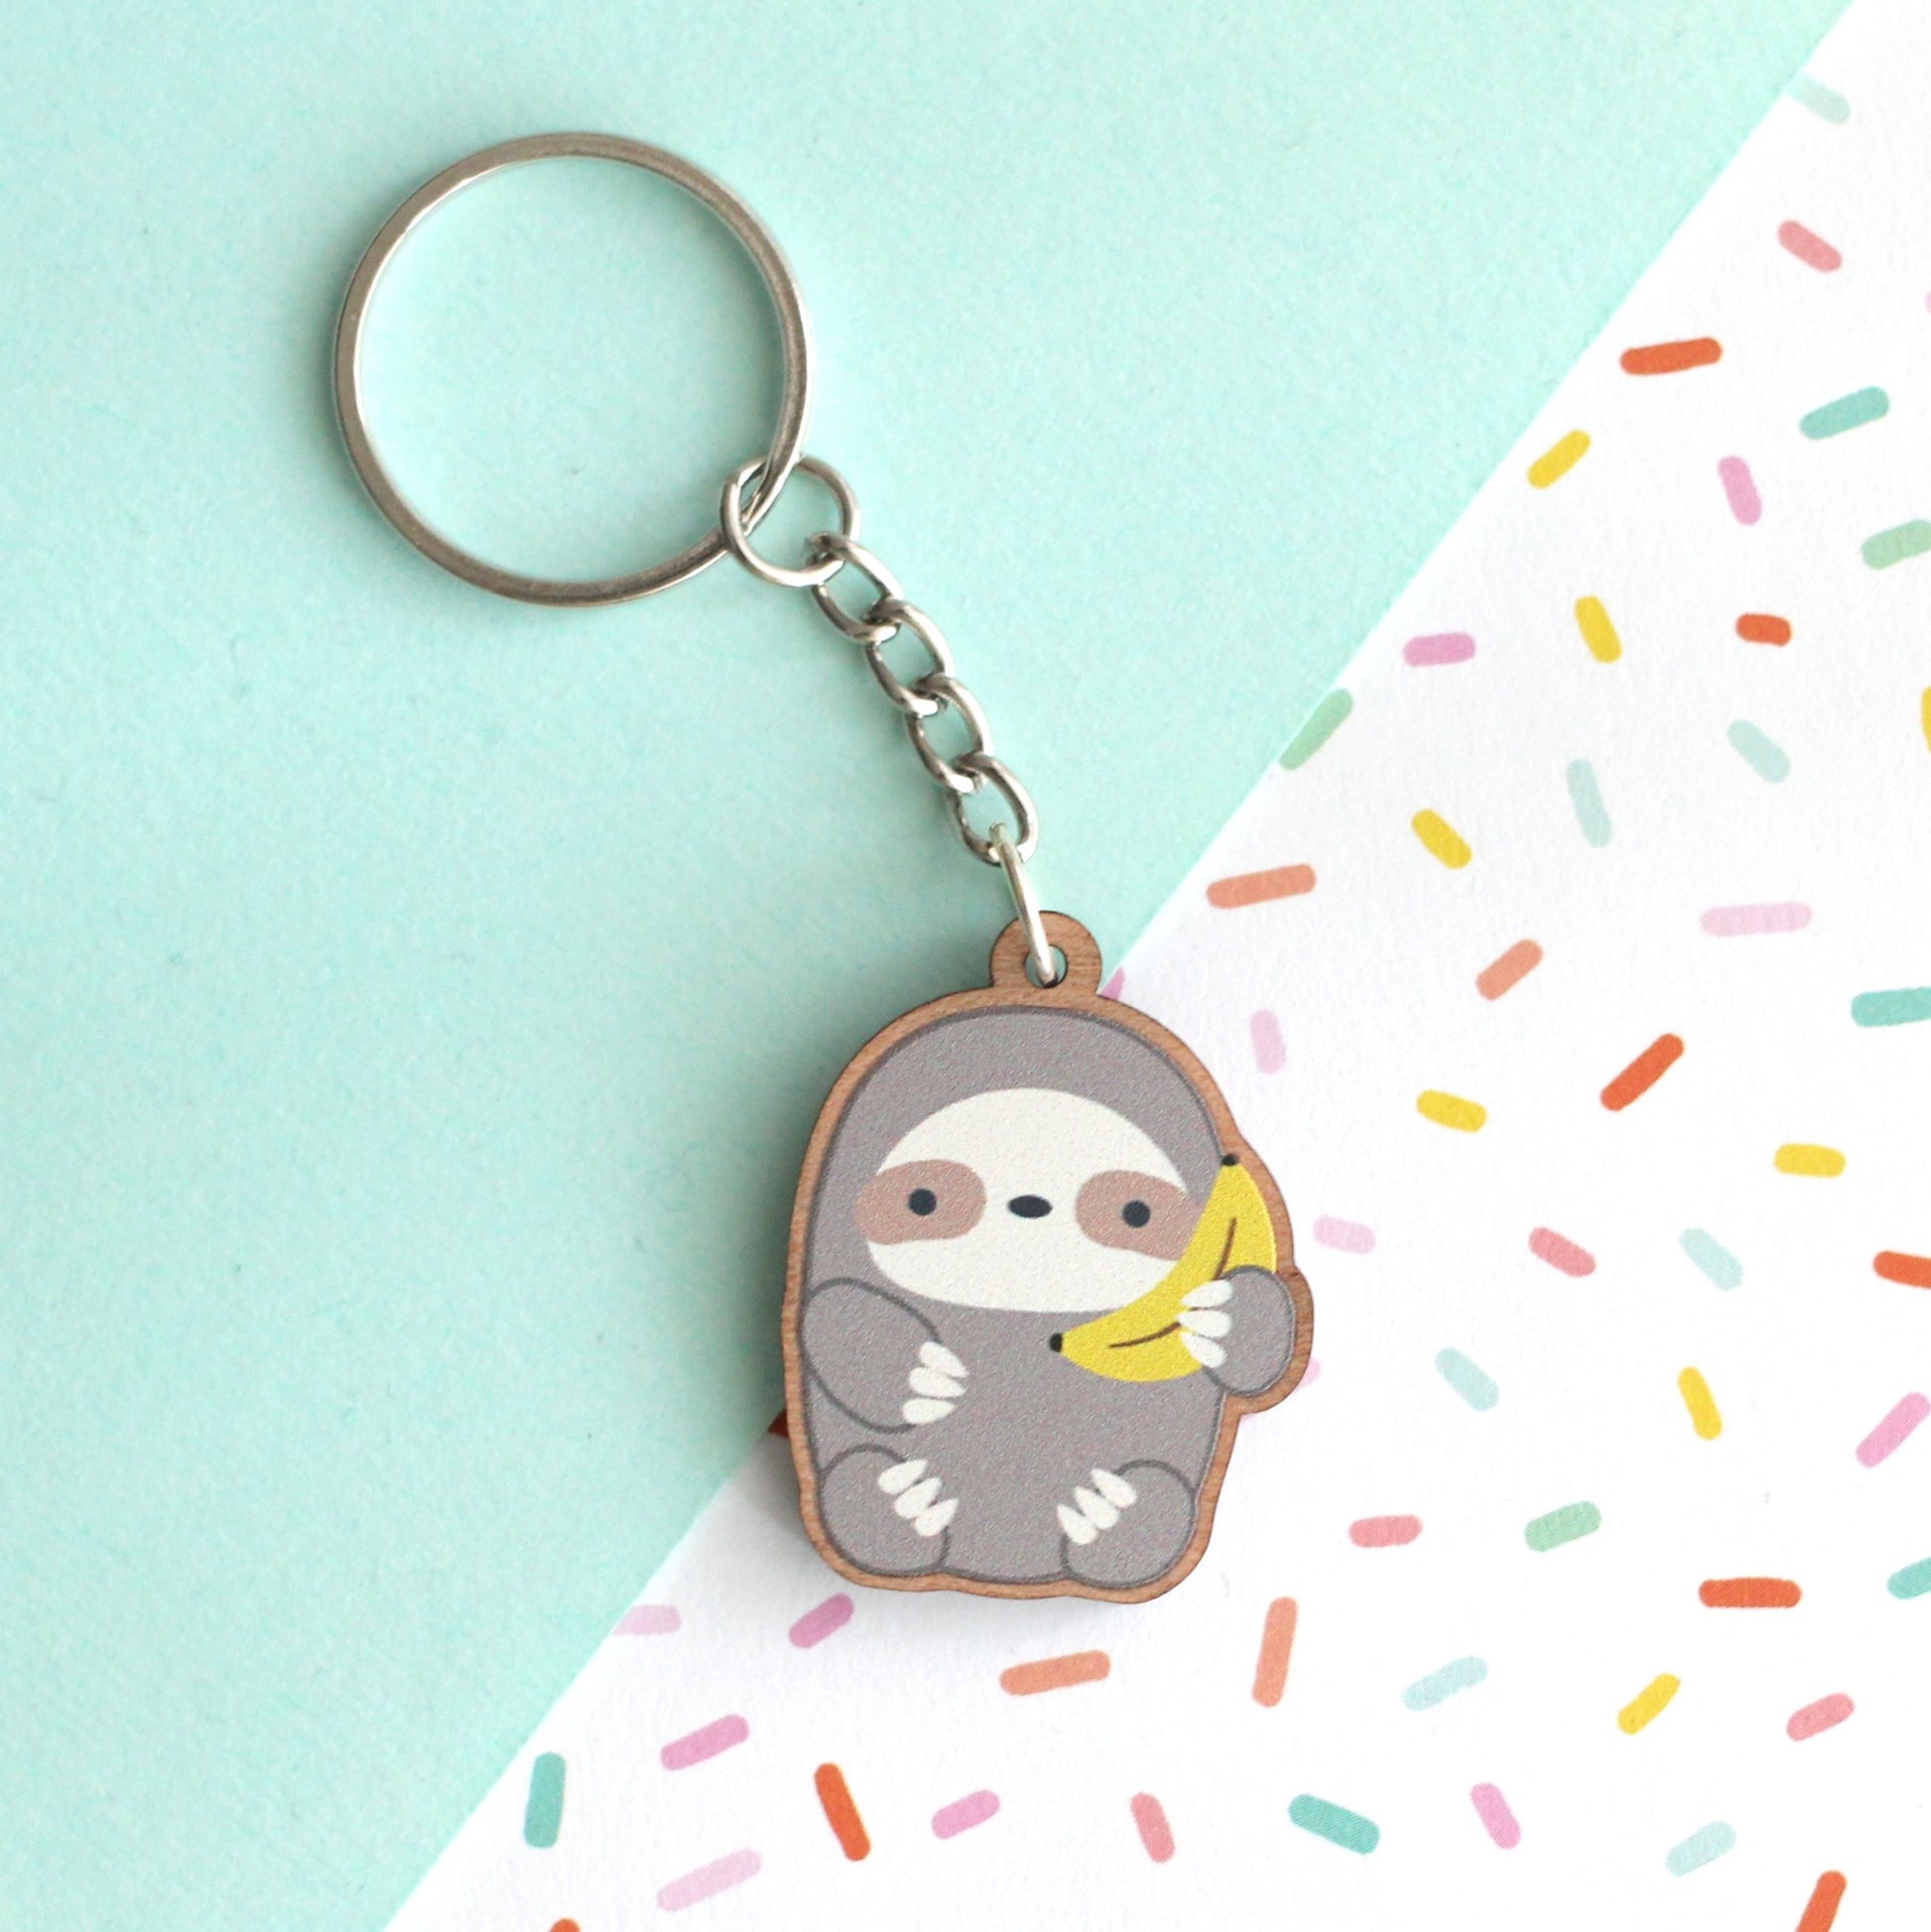 Banana Sloth Wooden Keychain - Cute Wood Charm - Eco-Friendly Gift by Wild Whimsy Woolies